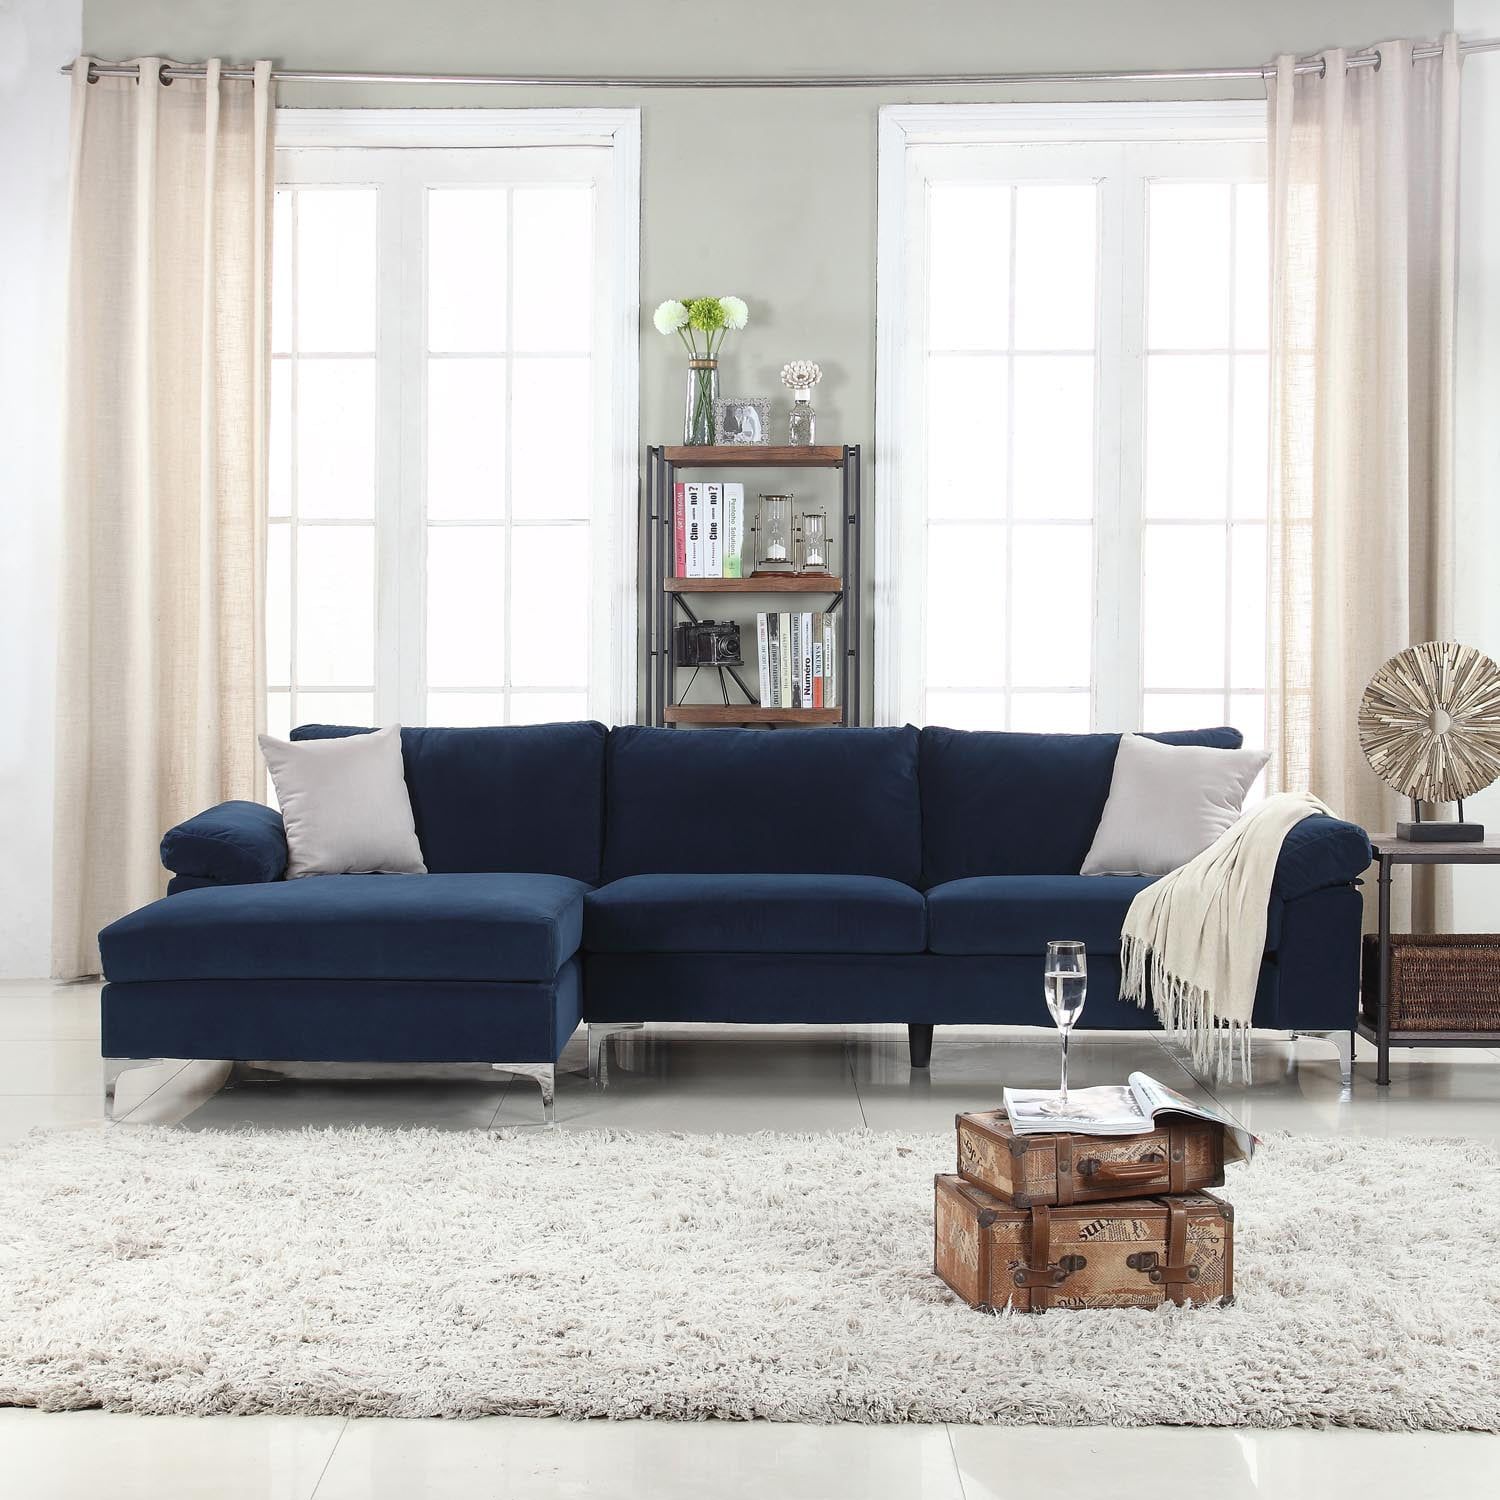 Modern Velvet Fabric Sectional Sofa, Large L Shape Couch With Wide With Regard To Modern Velvet Sofa Recliners With Storage (Gallery 15 of 20)